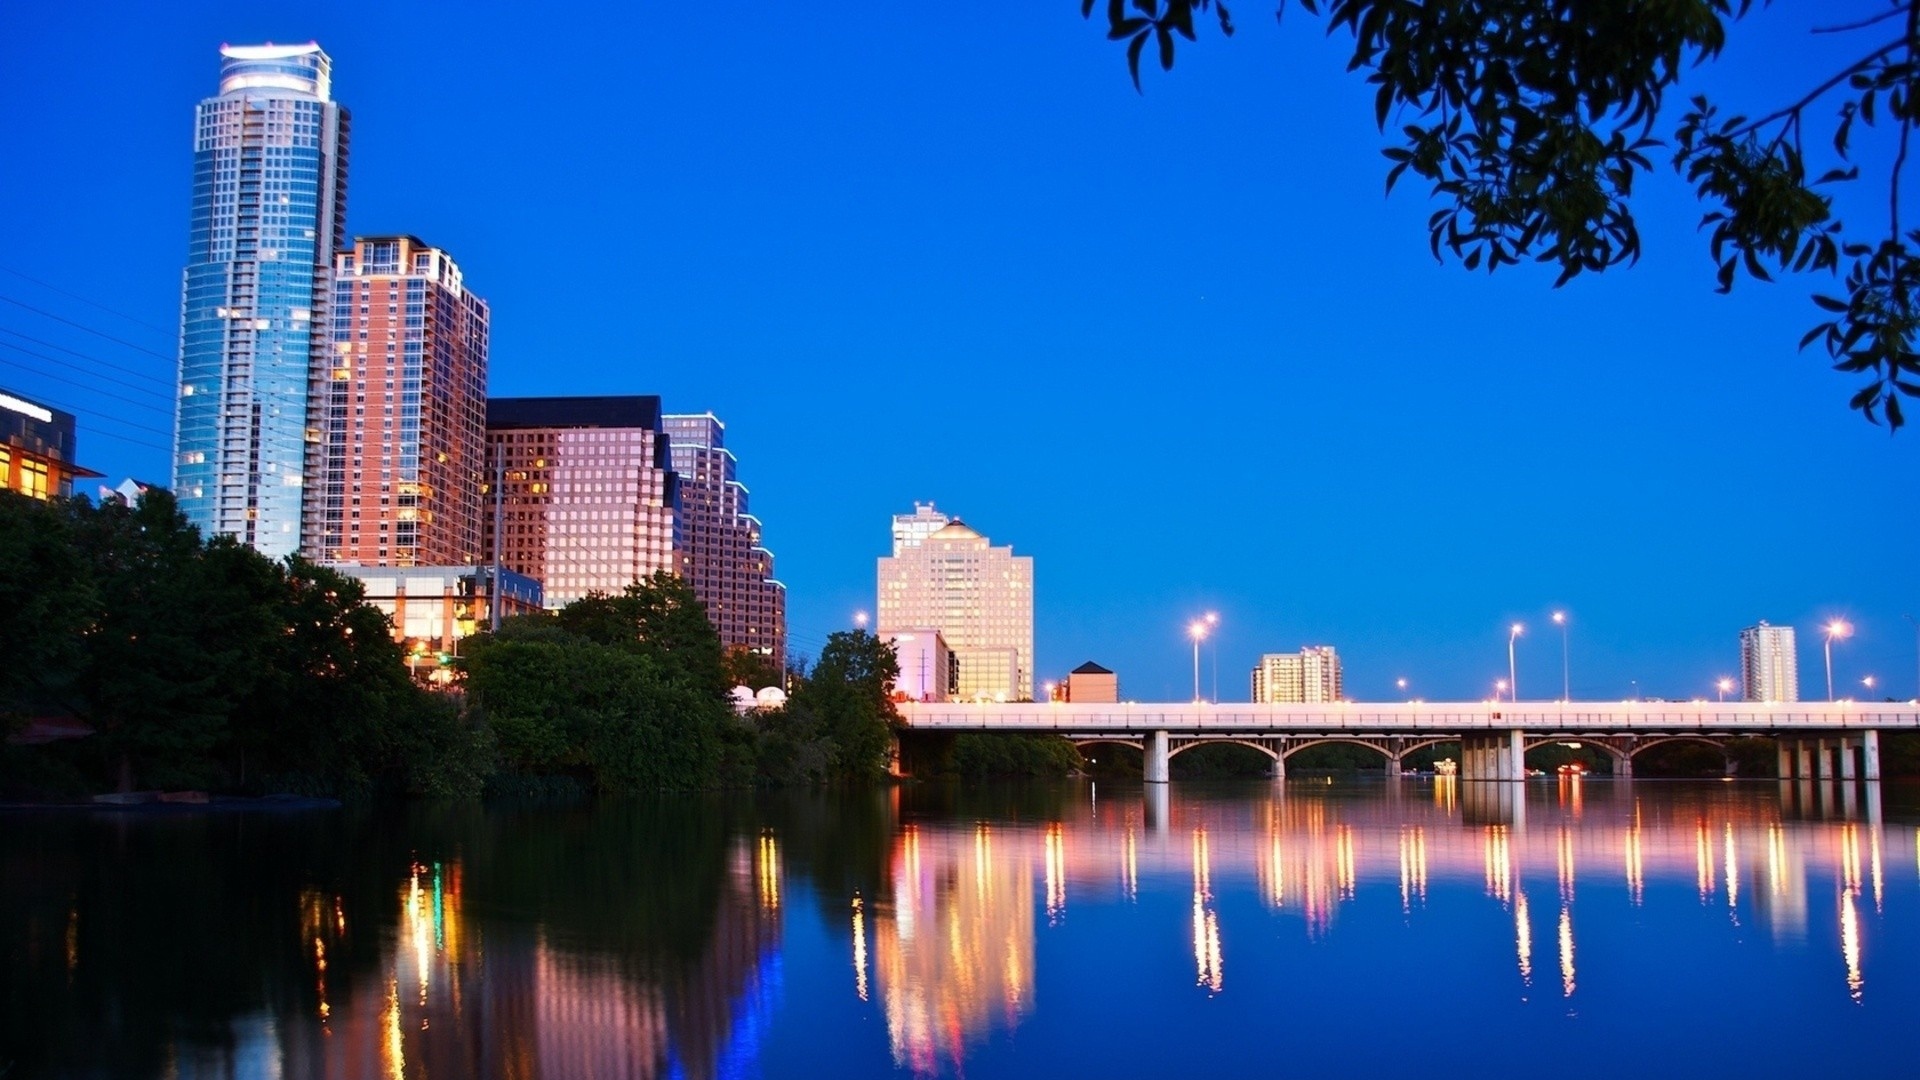 Austin: The city is known for its live music scene, with over 250 music venues. 1920x1080 Full HD Background.